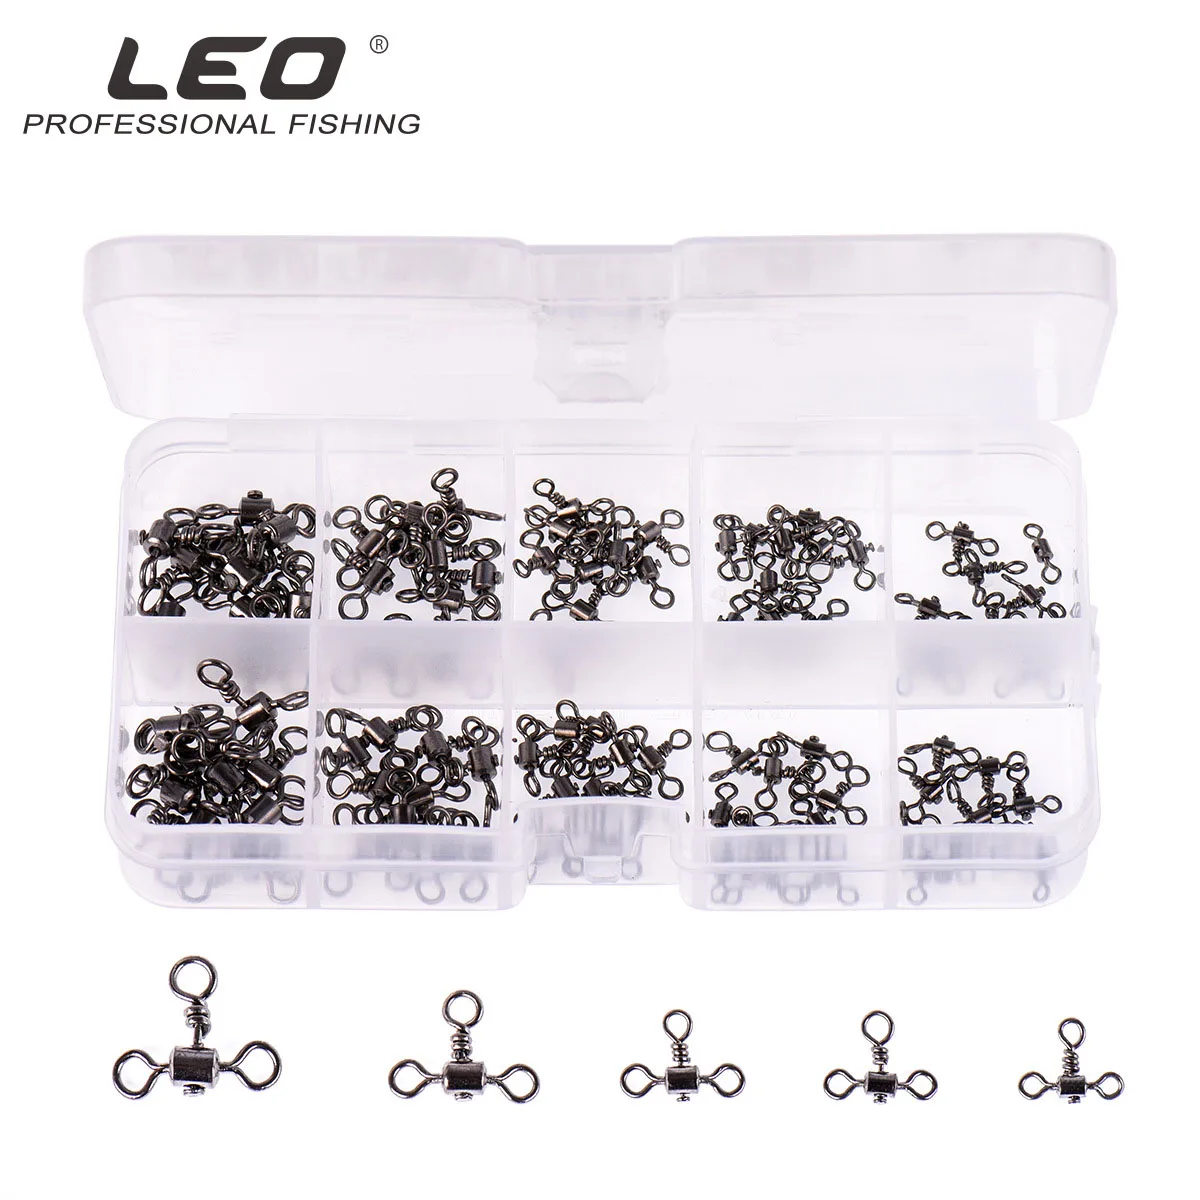 

100pcs Leo Fishing Connector 27820 Three Fork Balance Connector Fishing Accessories Pesca American Ring Lure Iron Nickel Plating